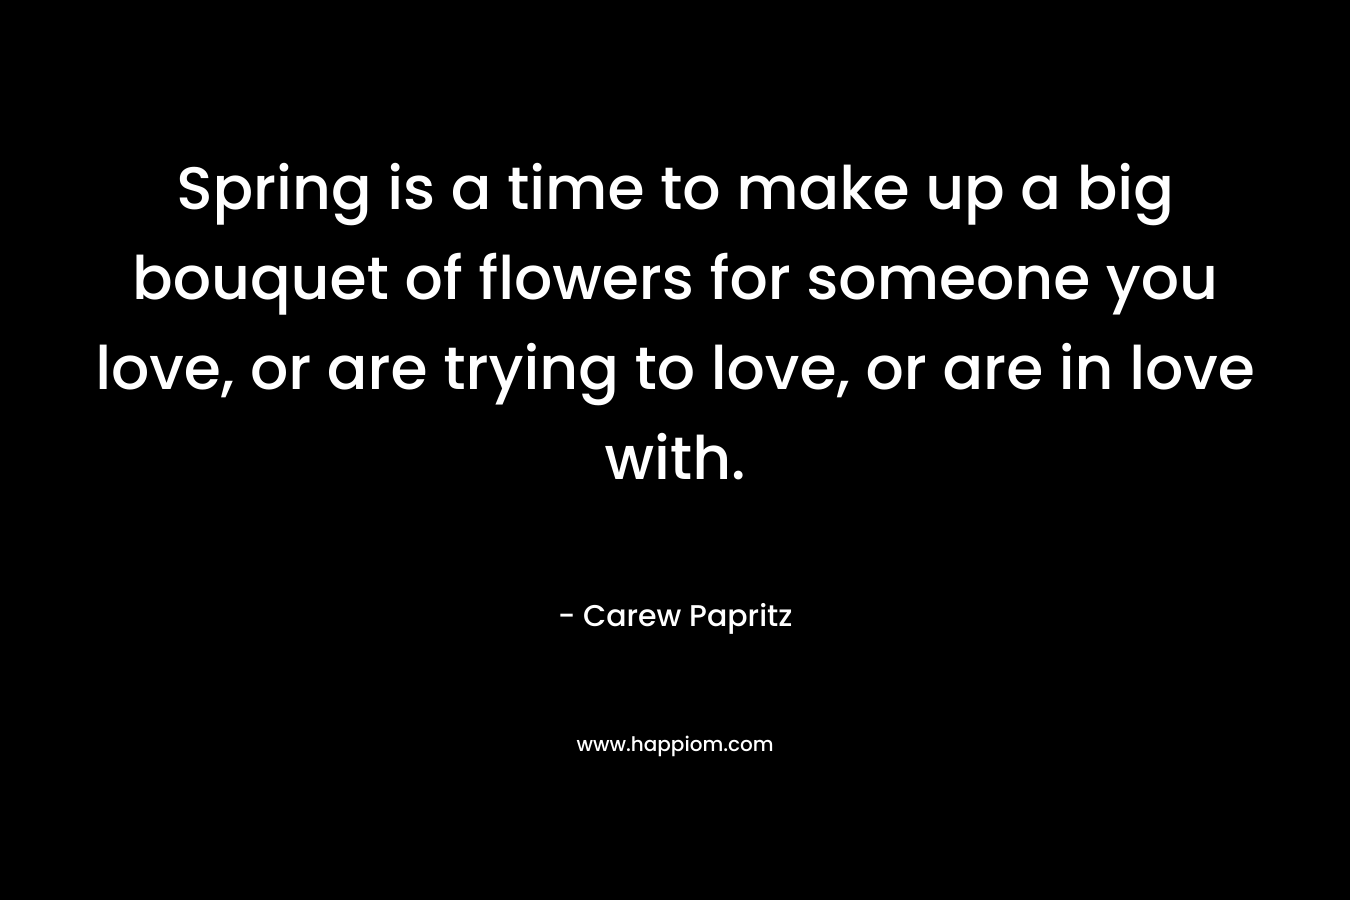 Spring is a time to make up a big bouquet of flowers for someone you love, or are trying to love, or are in love with.